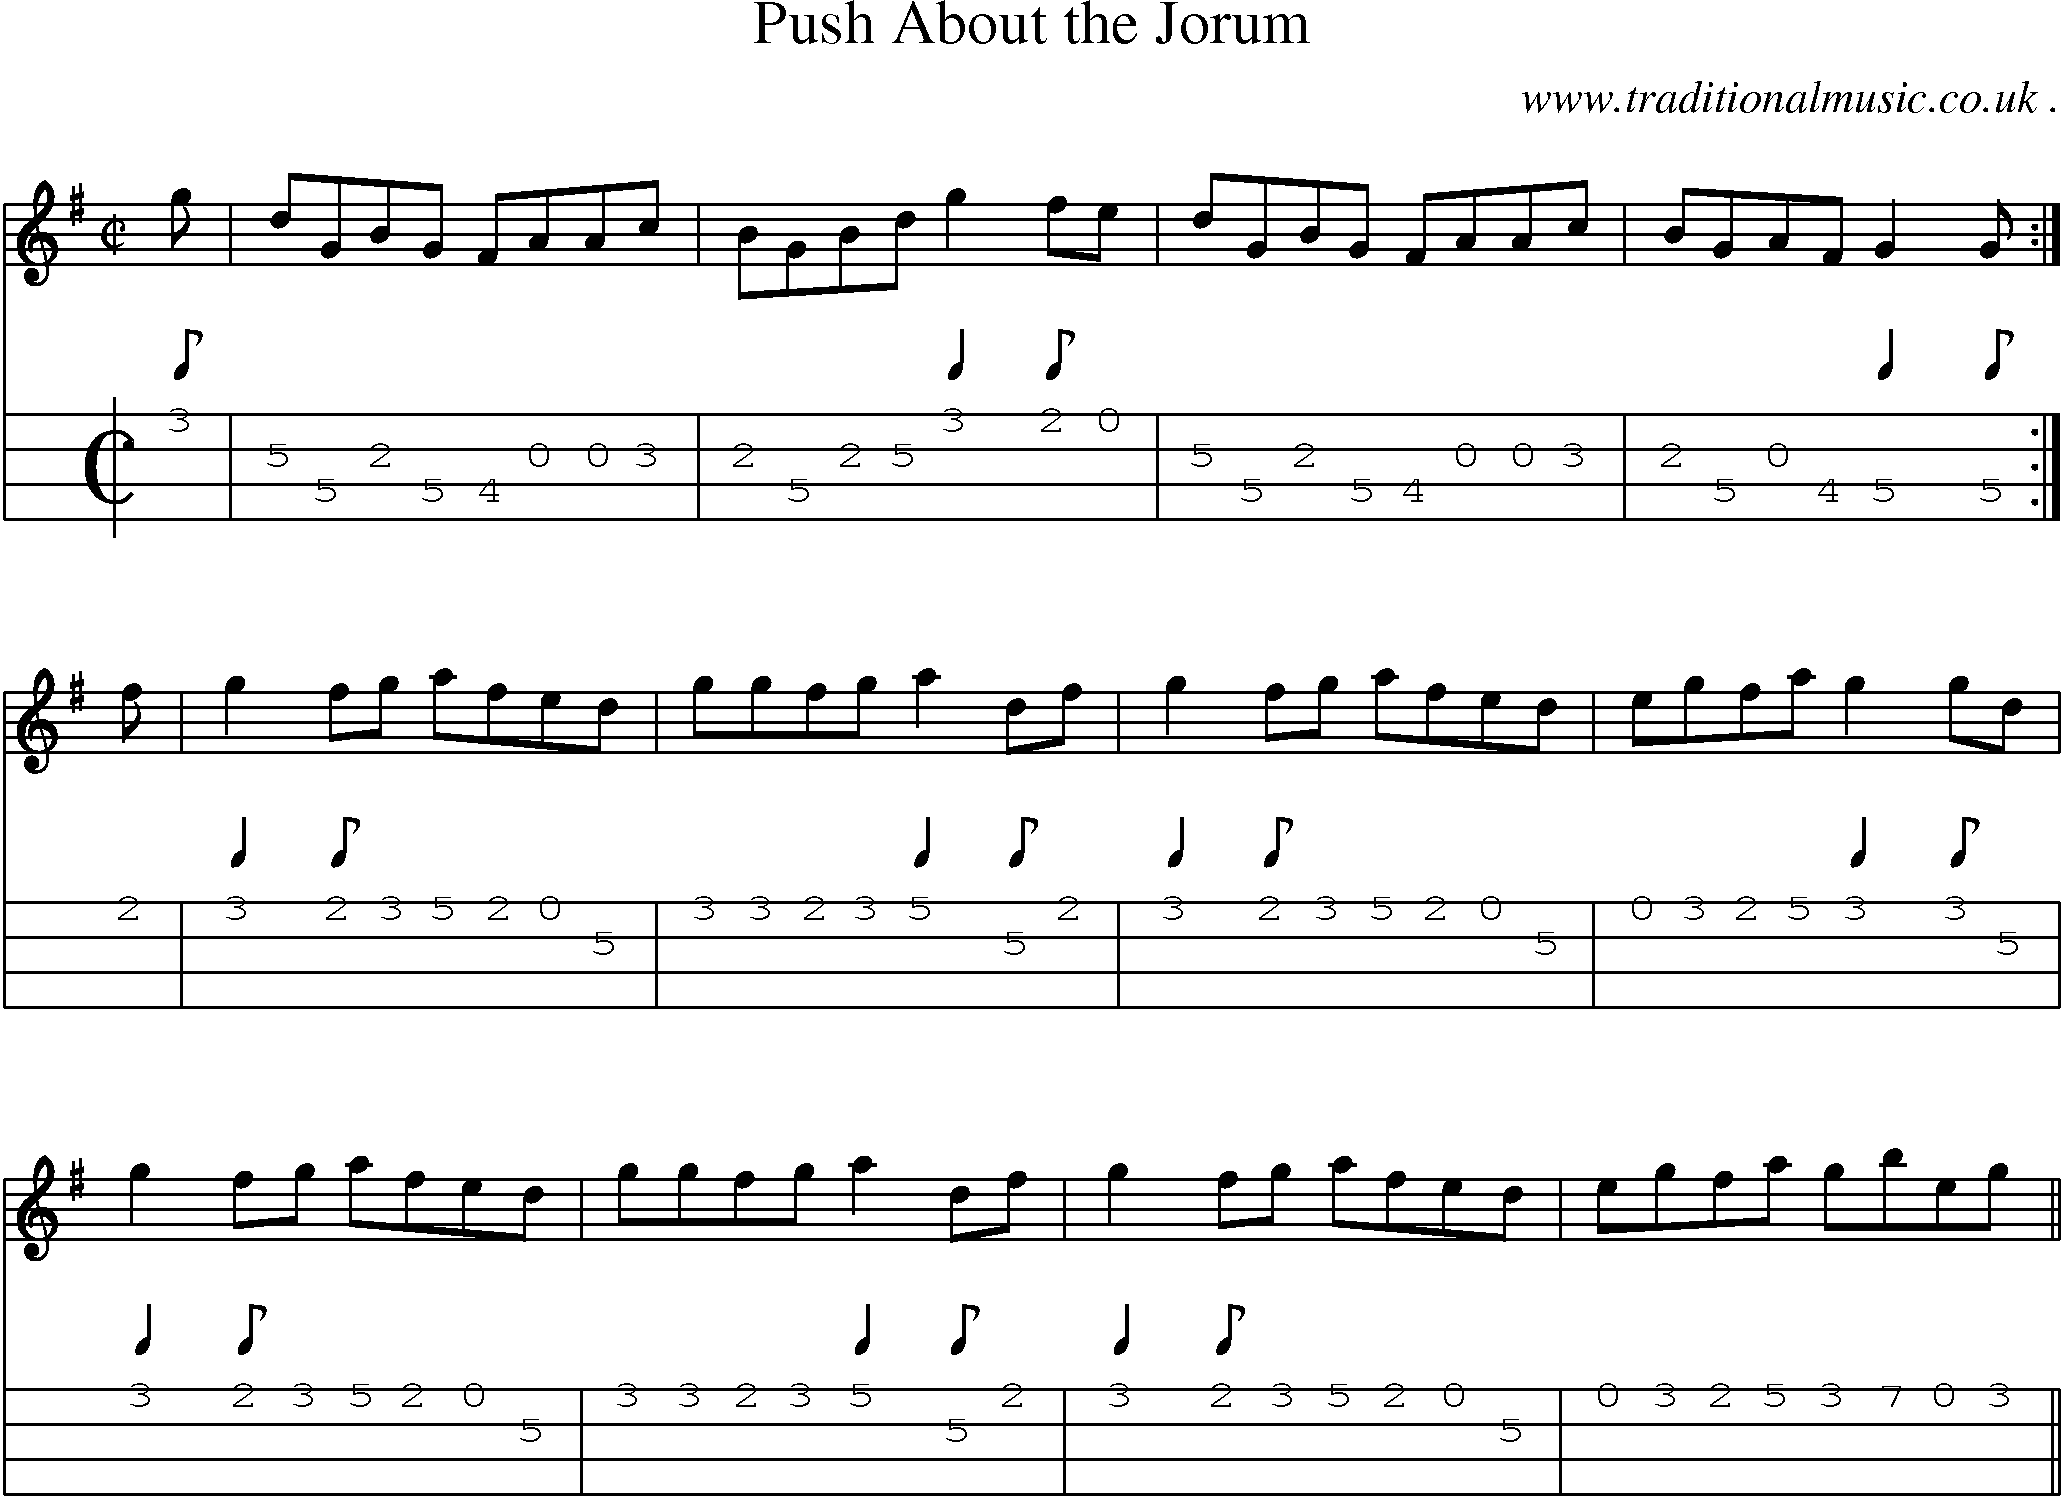 Sheet-music  score, Chords and Mandolin Tabs for Push About The Jorum